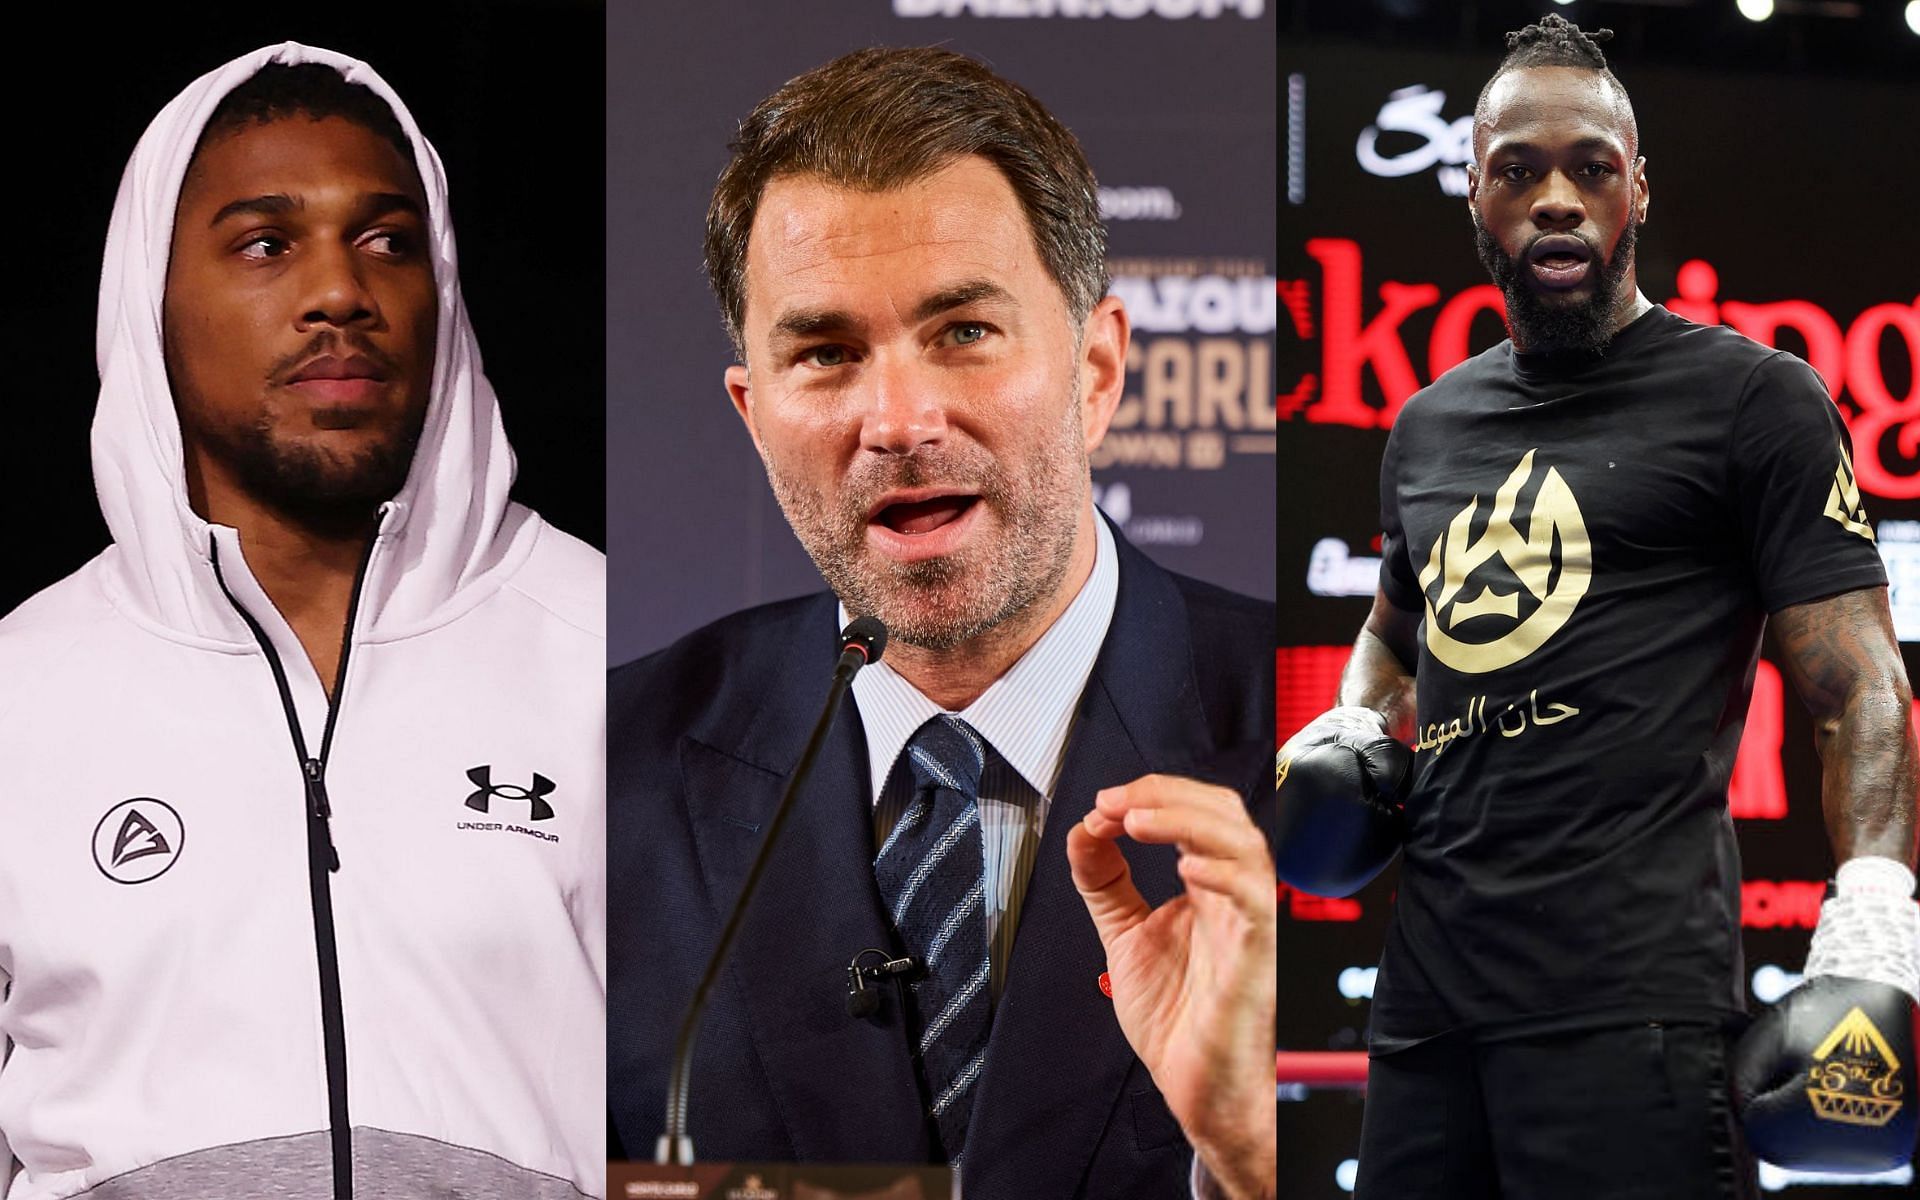 Eddie Hearn (middle) blasts Deontay Wilder (right) for question Anthony Joshua